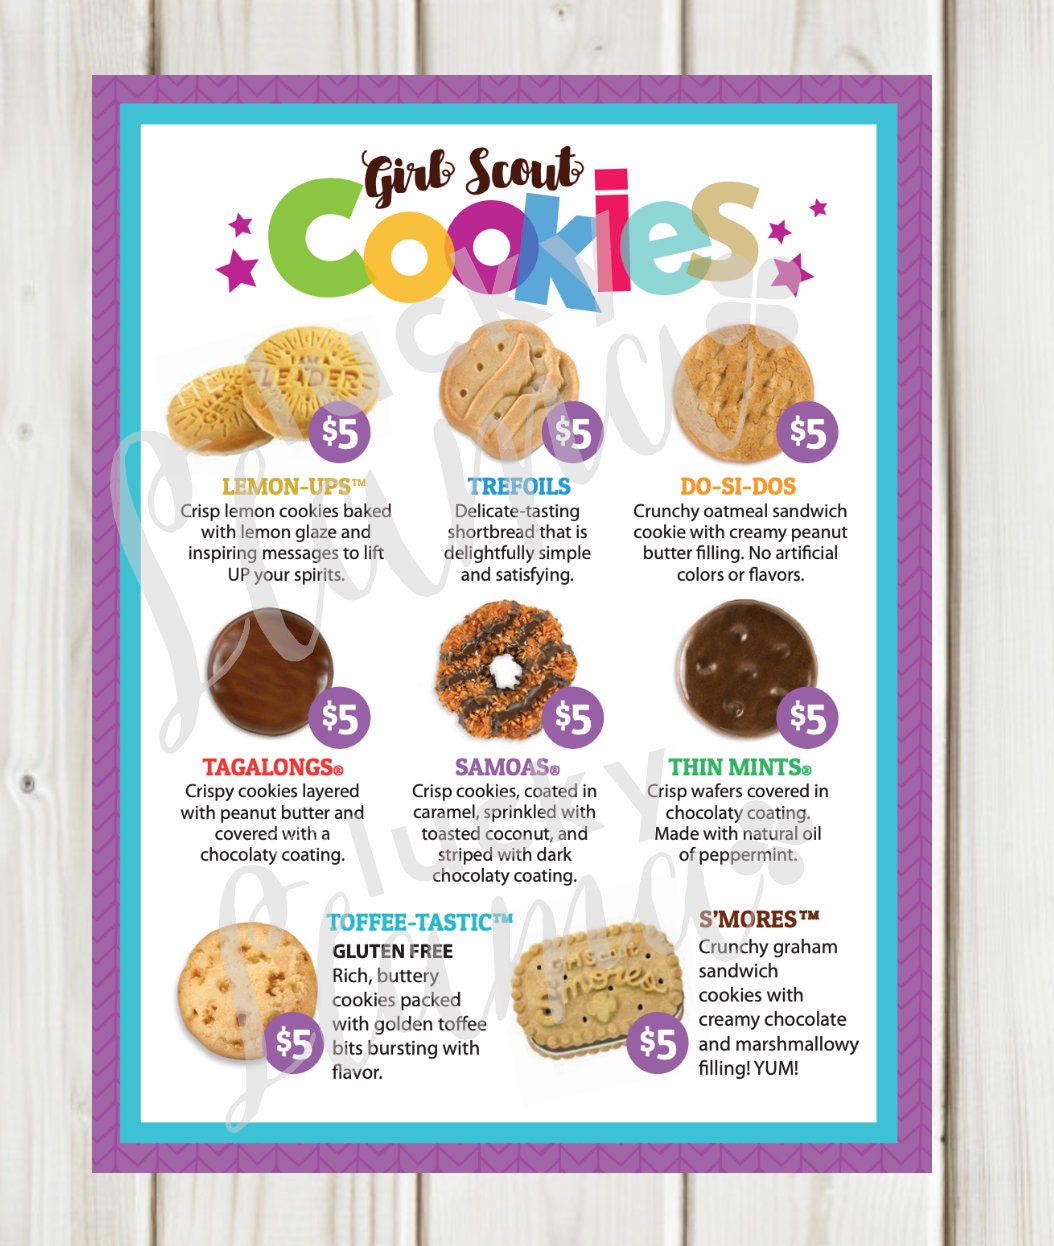 LBB Girl Scout Cookie Menu Cookie prices are all 5.00 8.5 Etsy